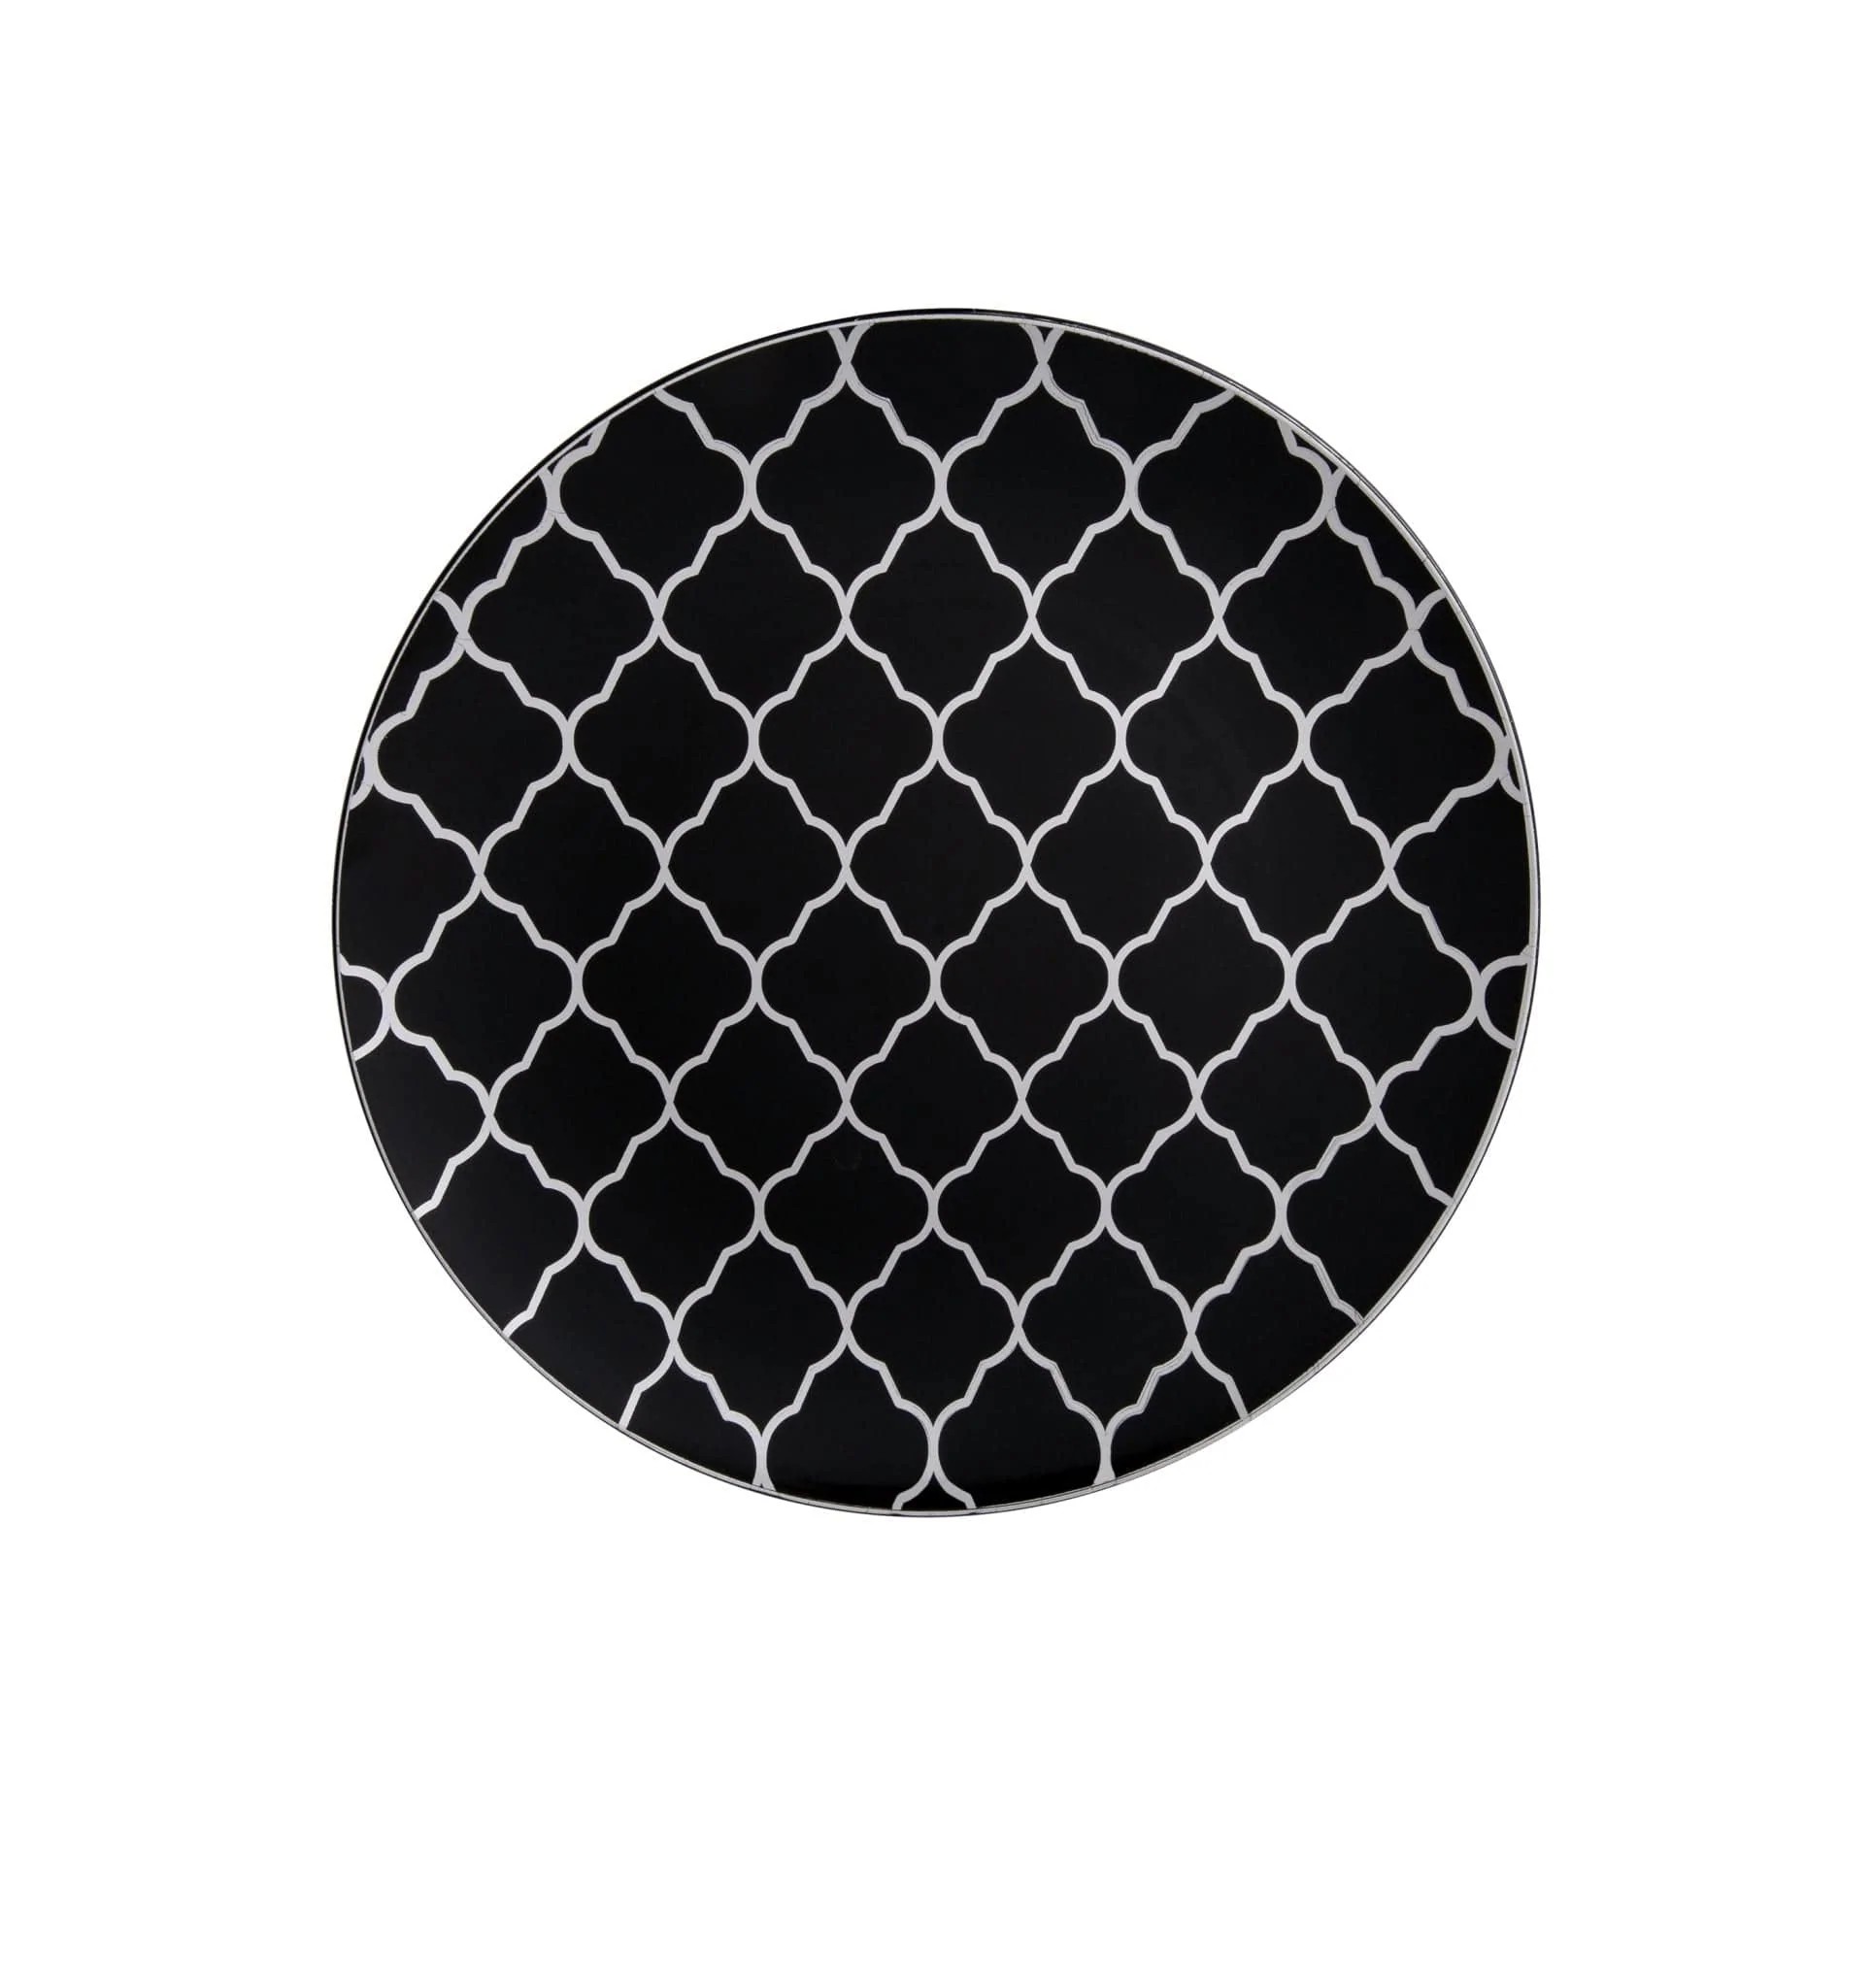 Luxe Party Black with Silver Lattice Pattern Plastic Appetizer Plate 7.25